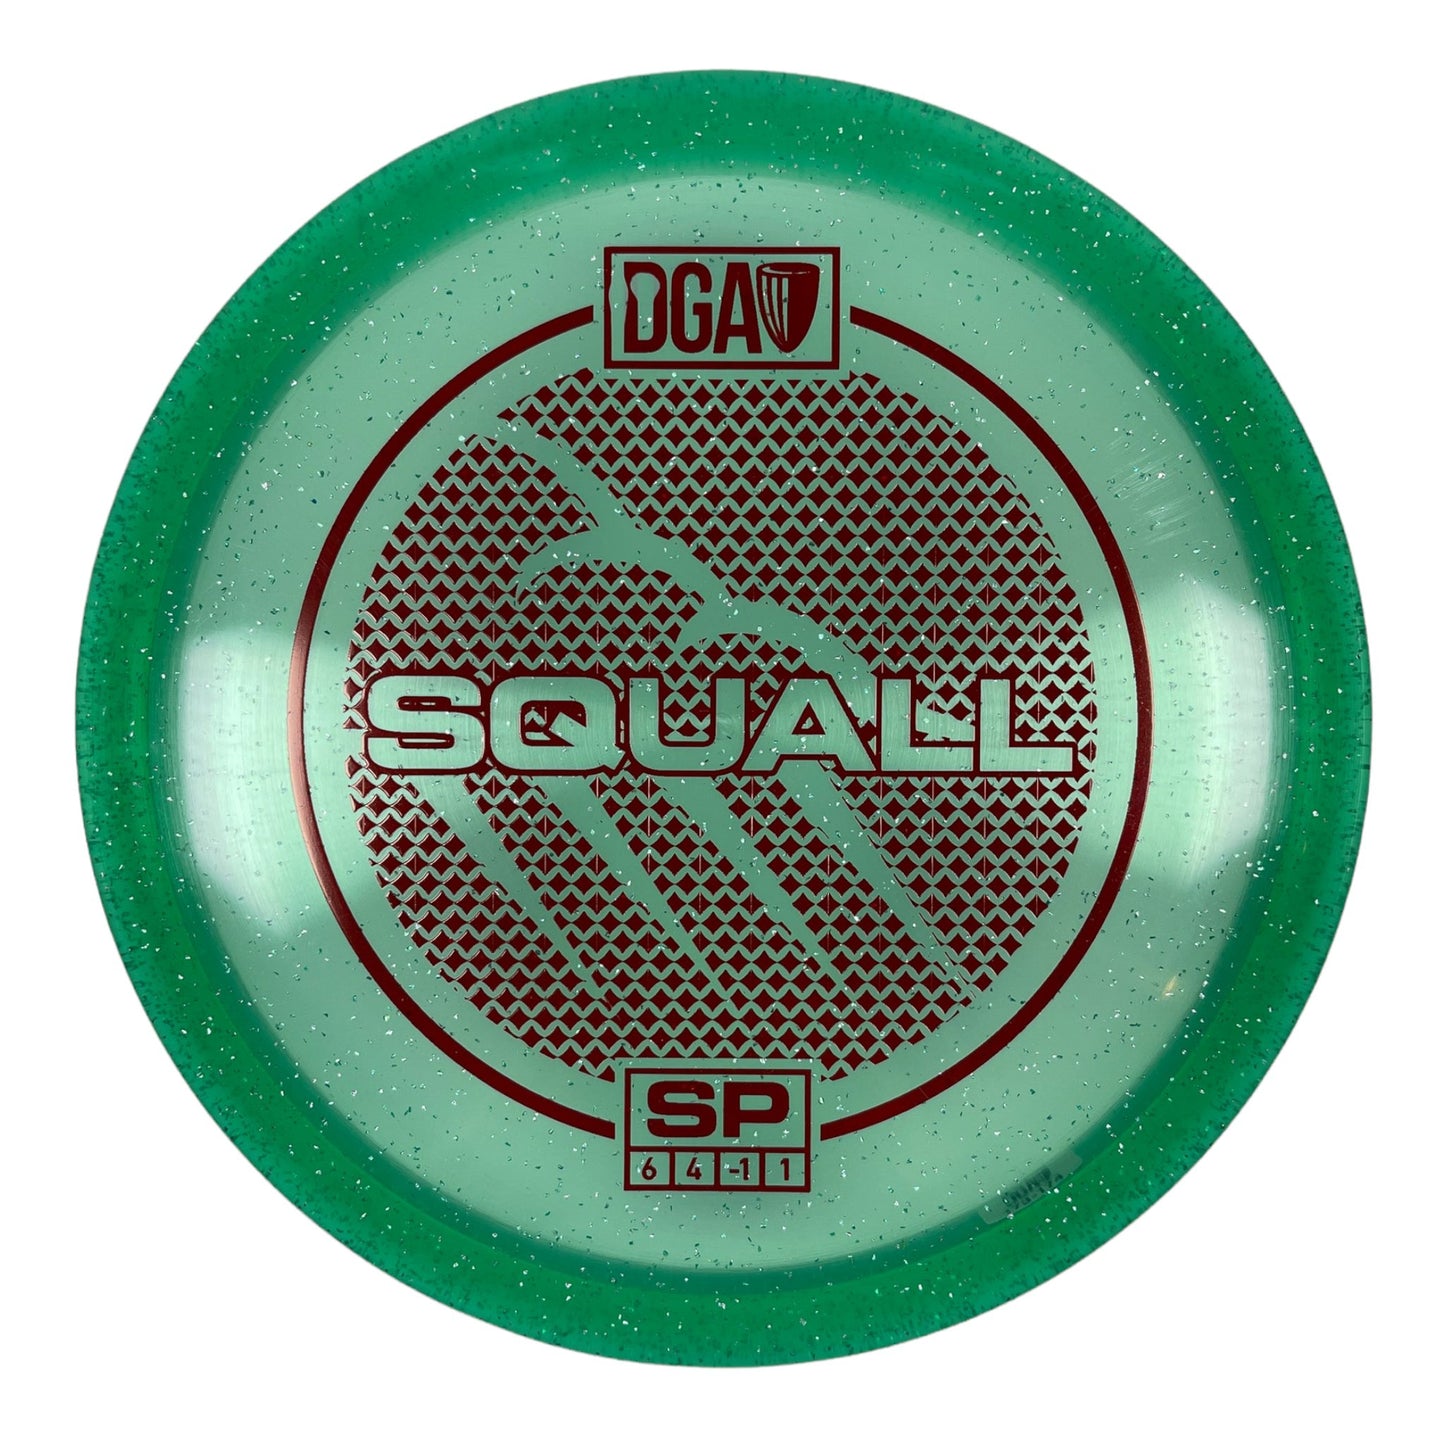 DGA Squall | SP | Green/Red 173-174g Disc Golf